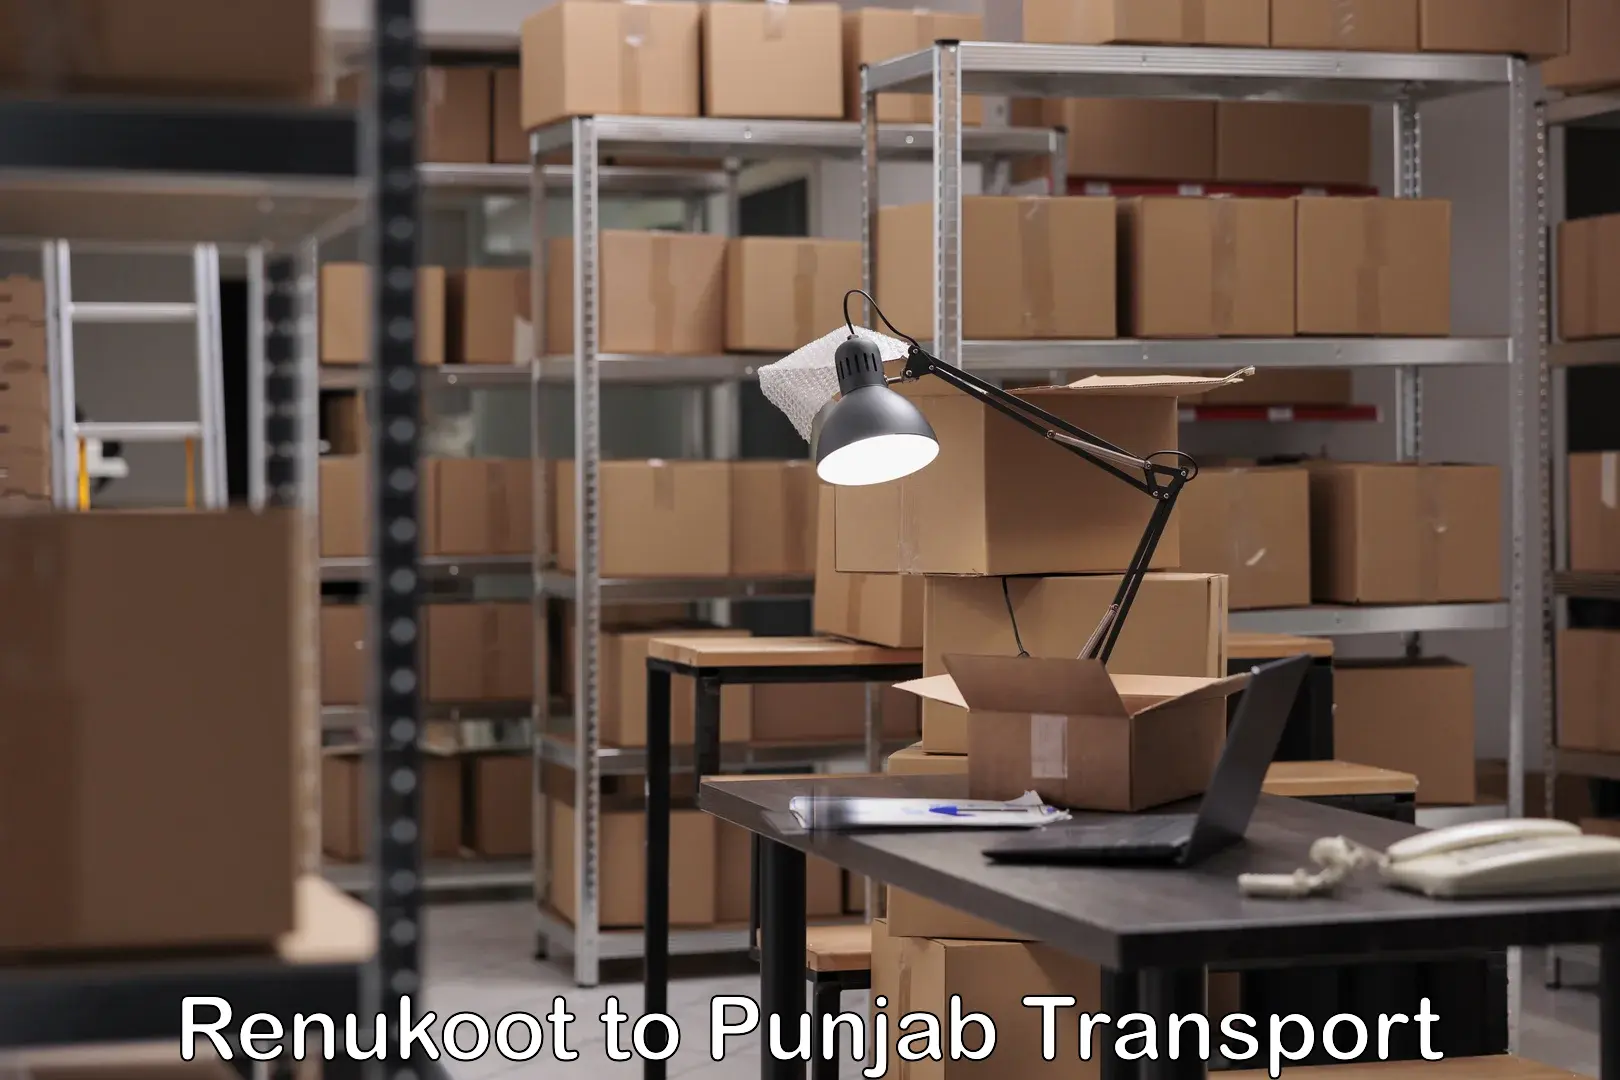 Container transport service Renukoot to Punjab